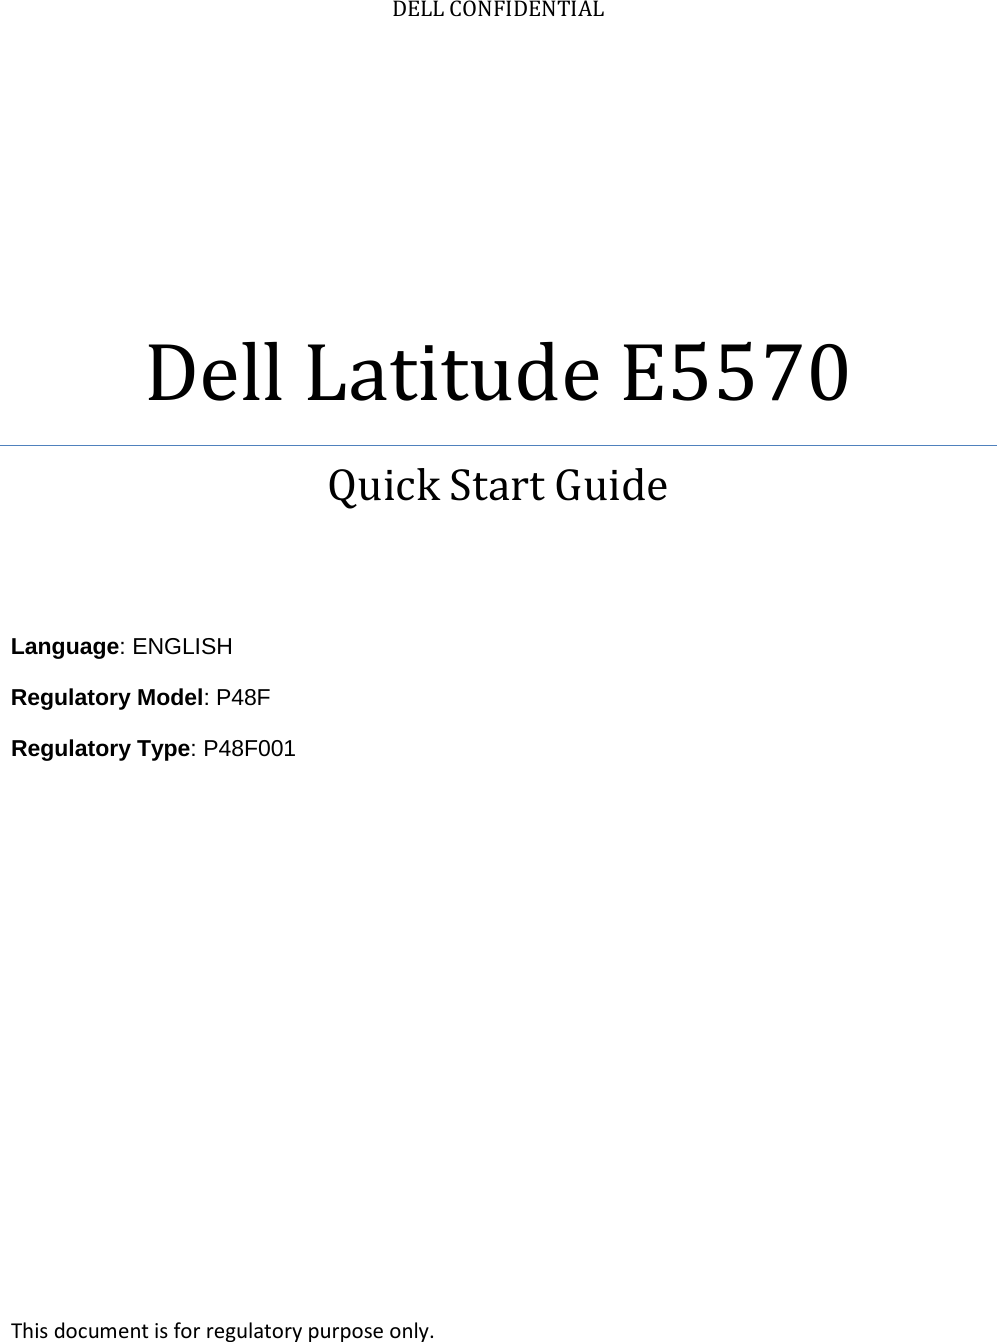 DELL CONFIDENTIAL Dell Latitude E5570 Quick Start Guide    Language: ENGLISH Regulatory Model: P48F Regulatory Type: P48F001      This document is for regulatory purpose only. 